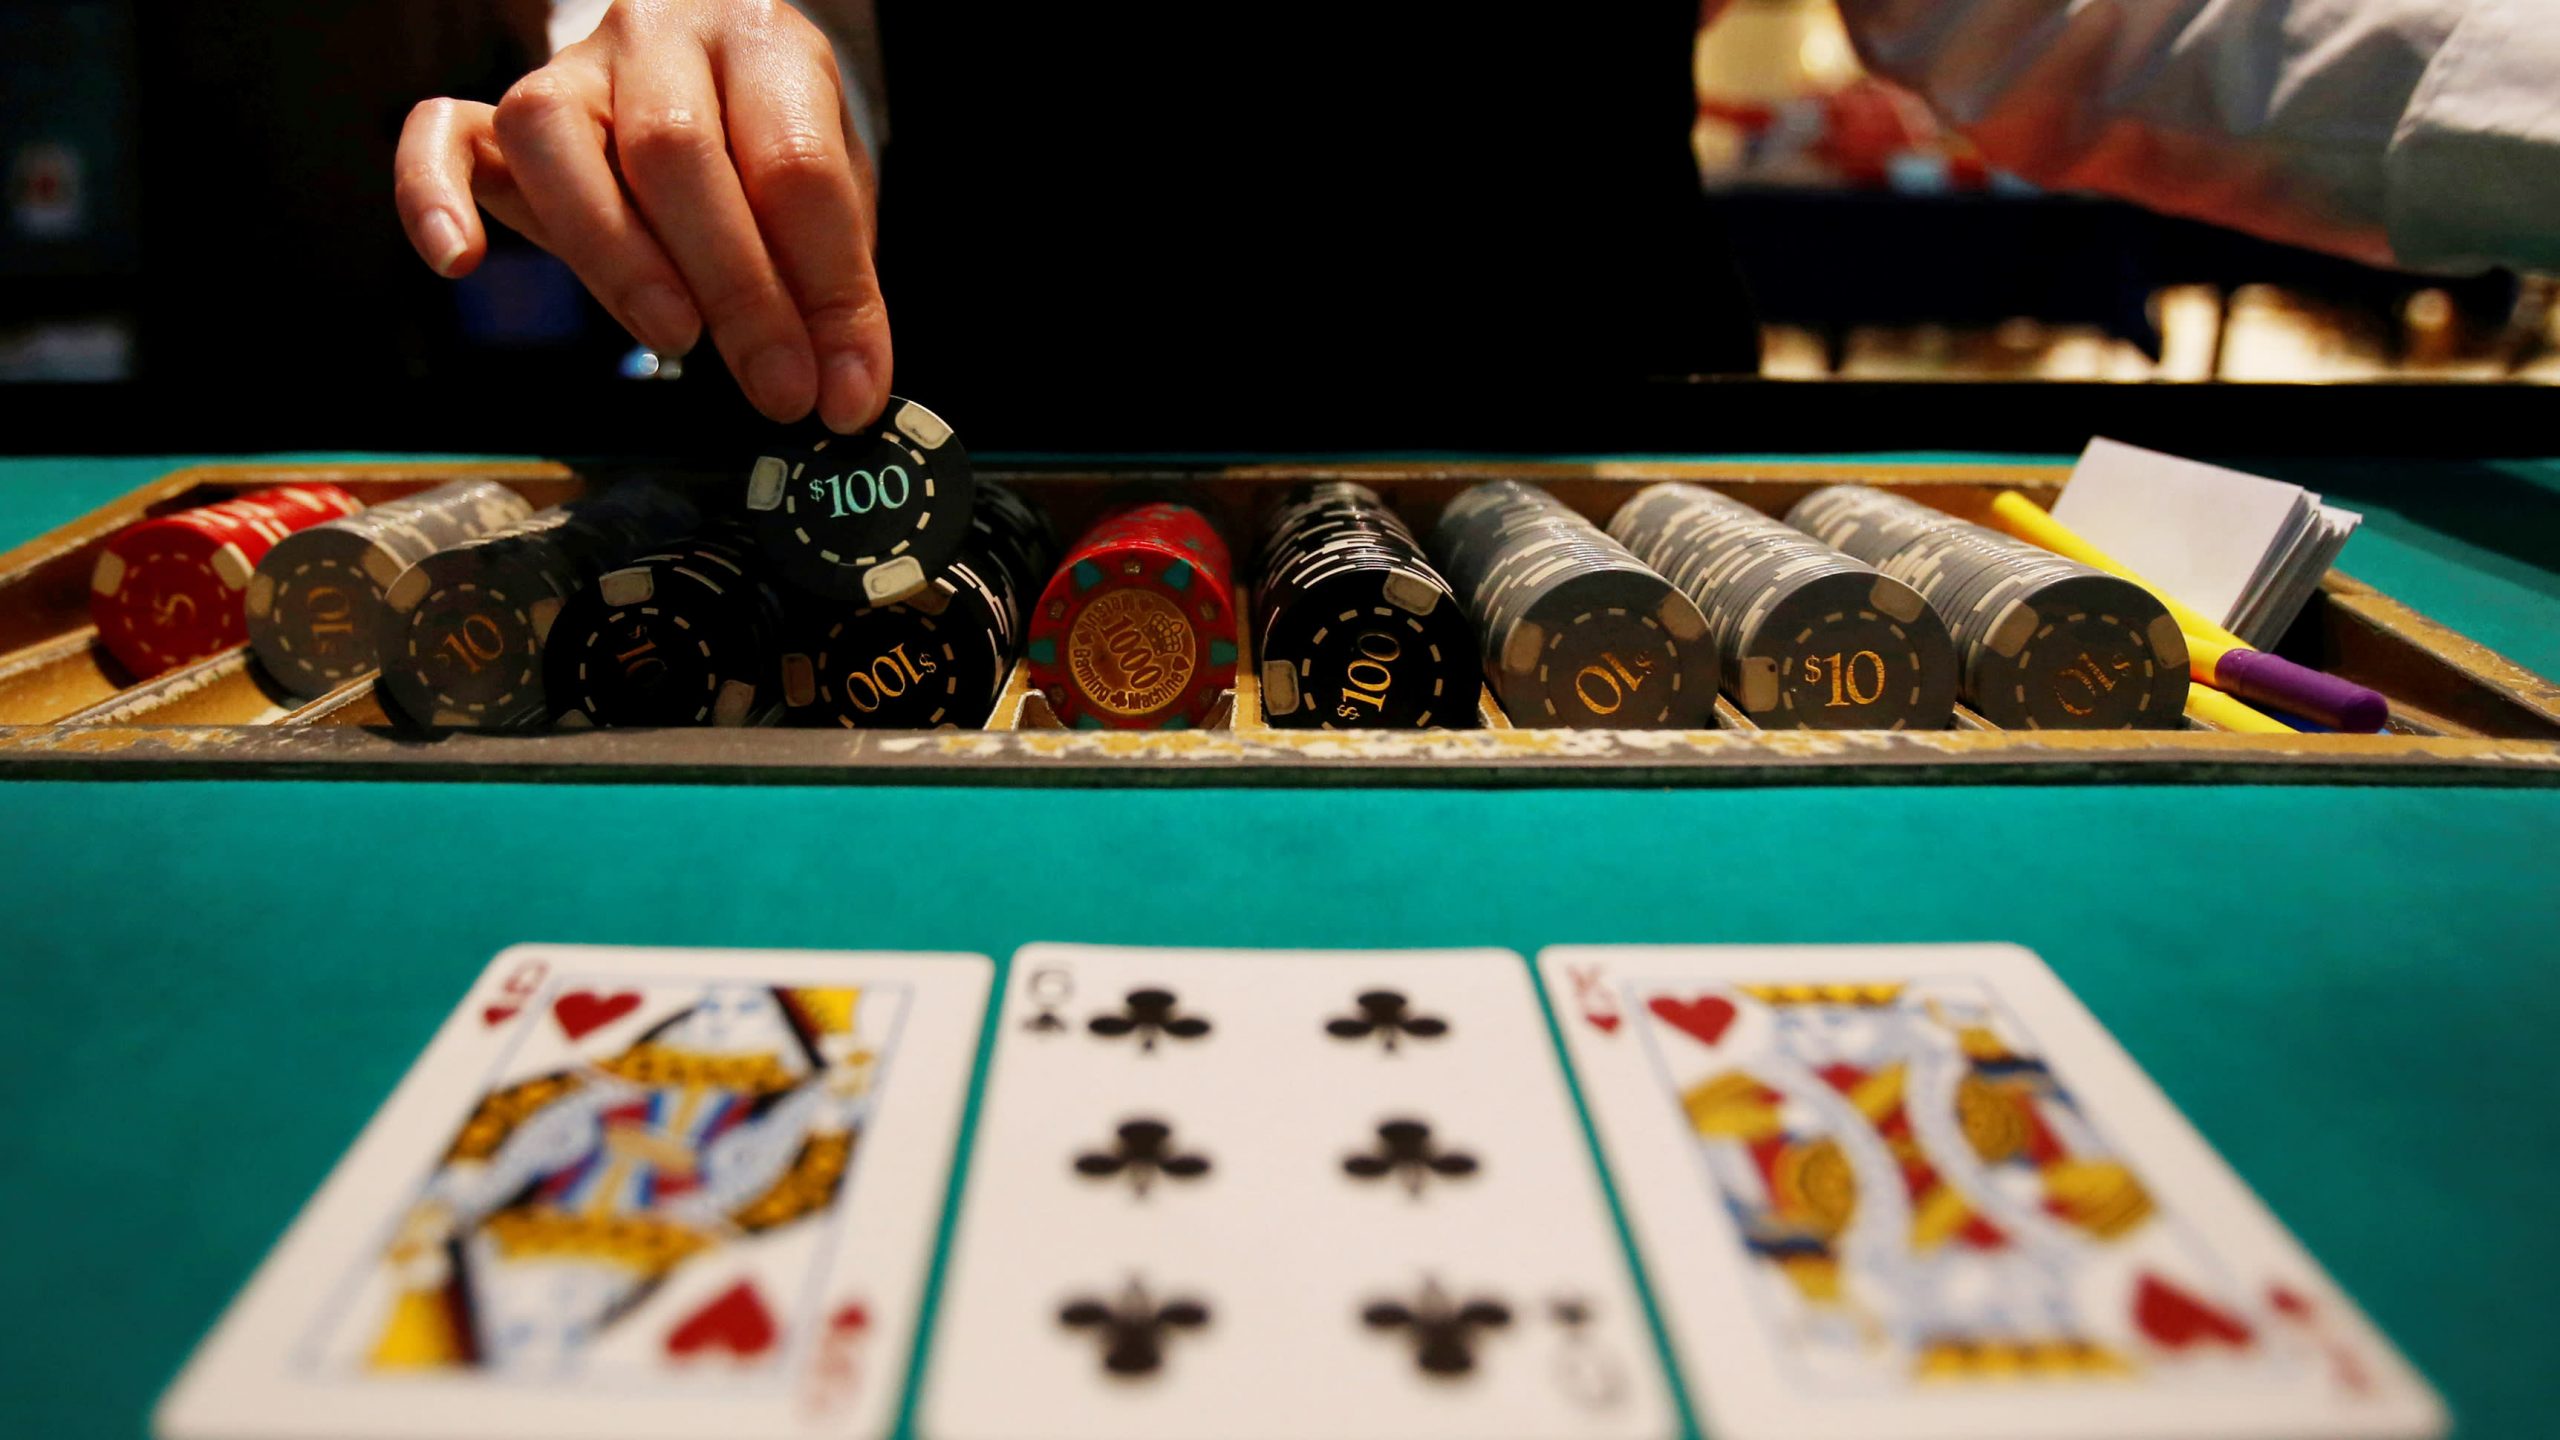 The Online Gambling Sector Sets New Q1 Records in Portugal